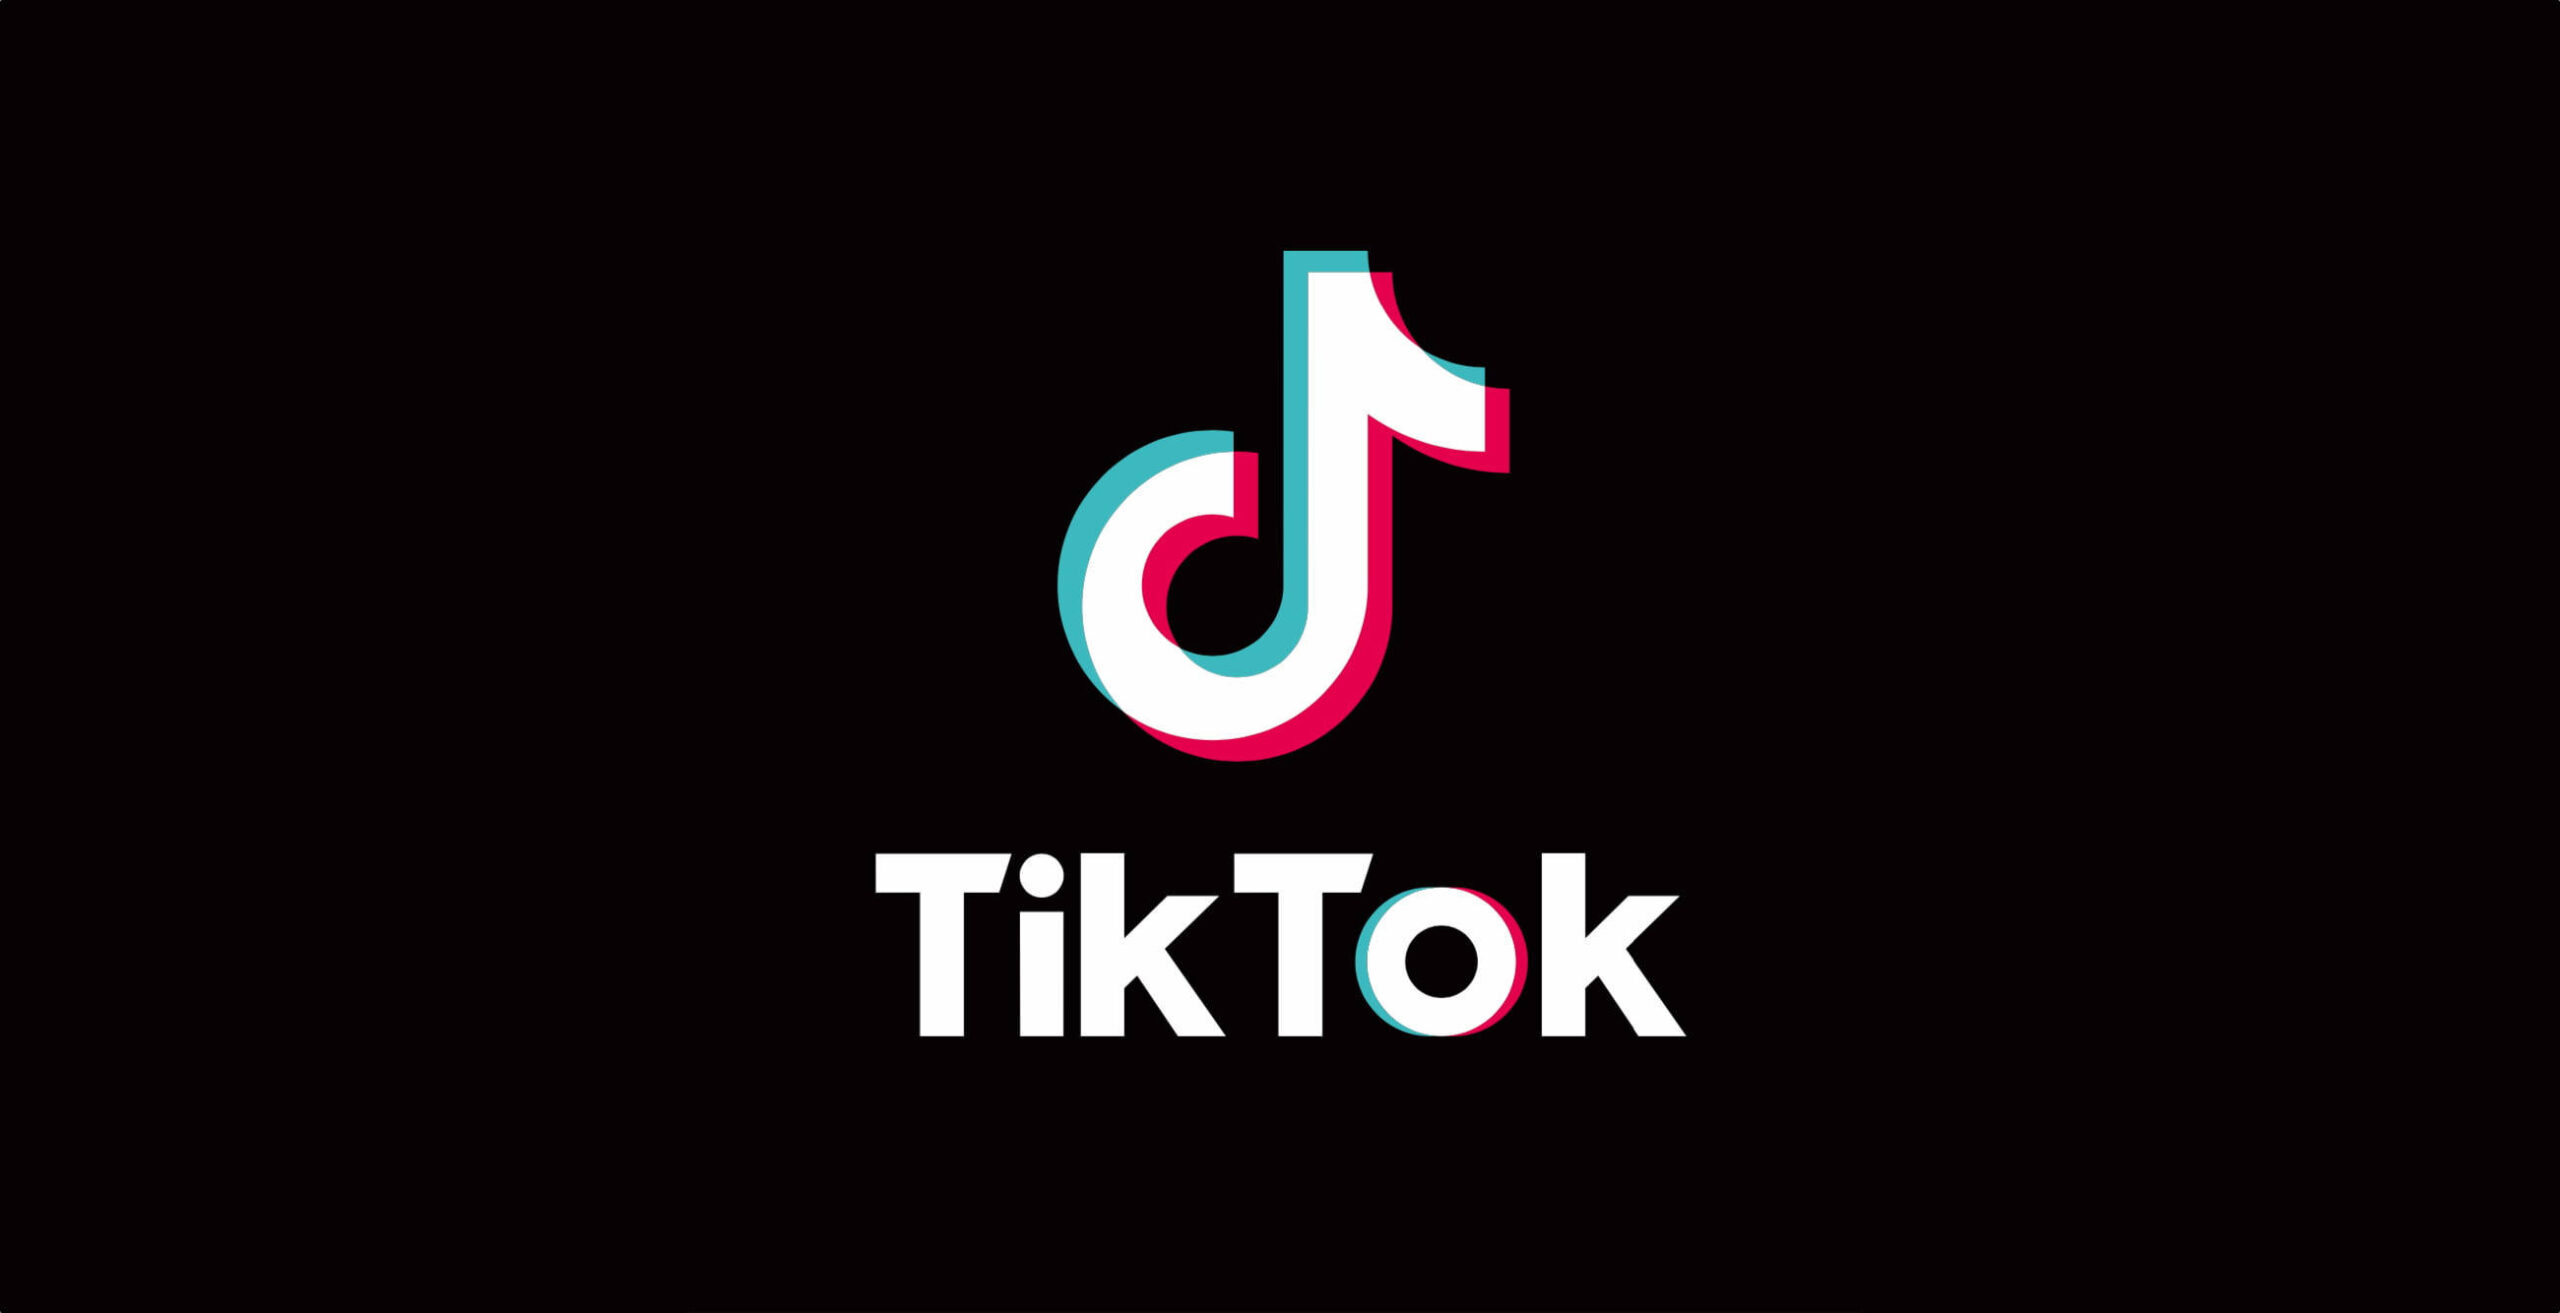 tiktok one of the top 10 social media sites in the world